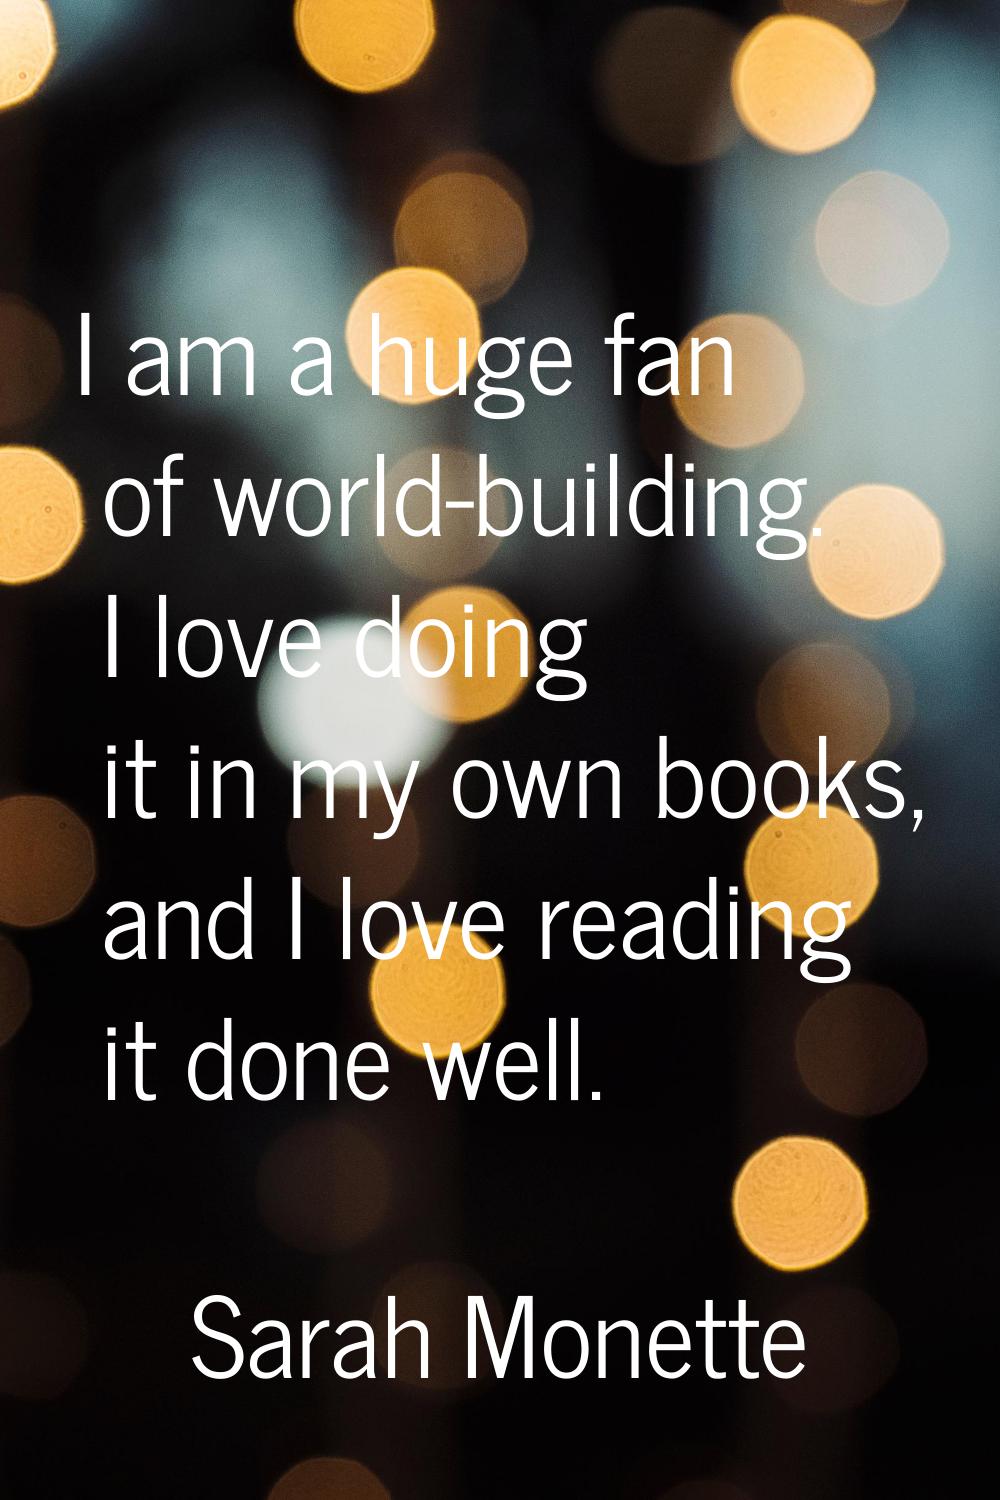 I am a huge fan of world-building. I love doing it in my own books, and I love reading it done well